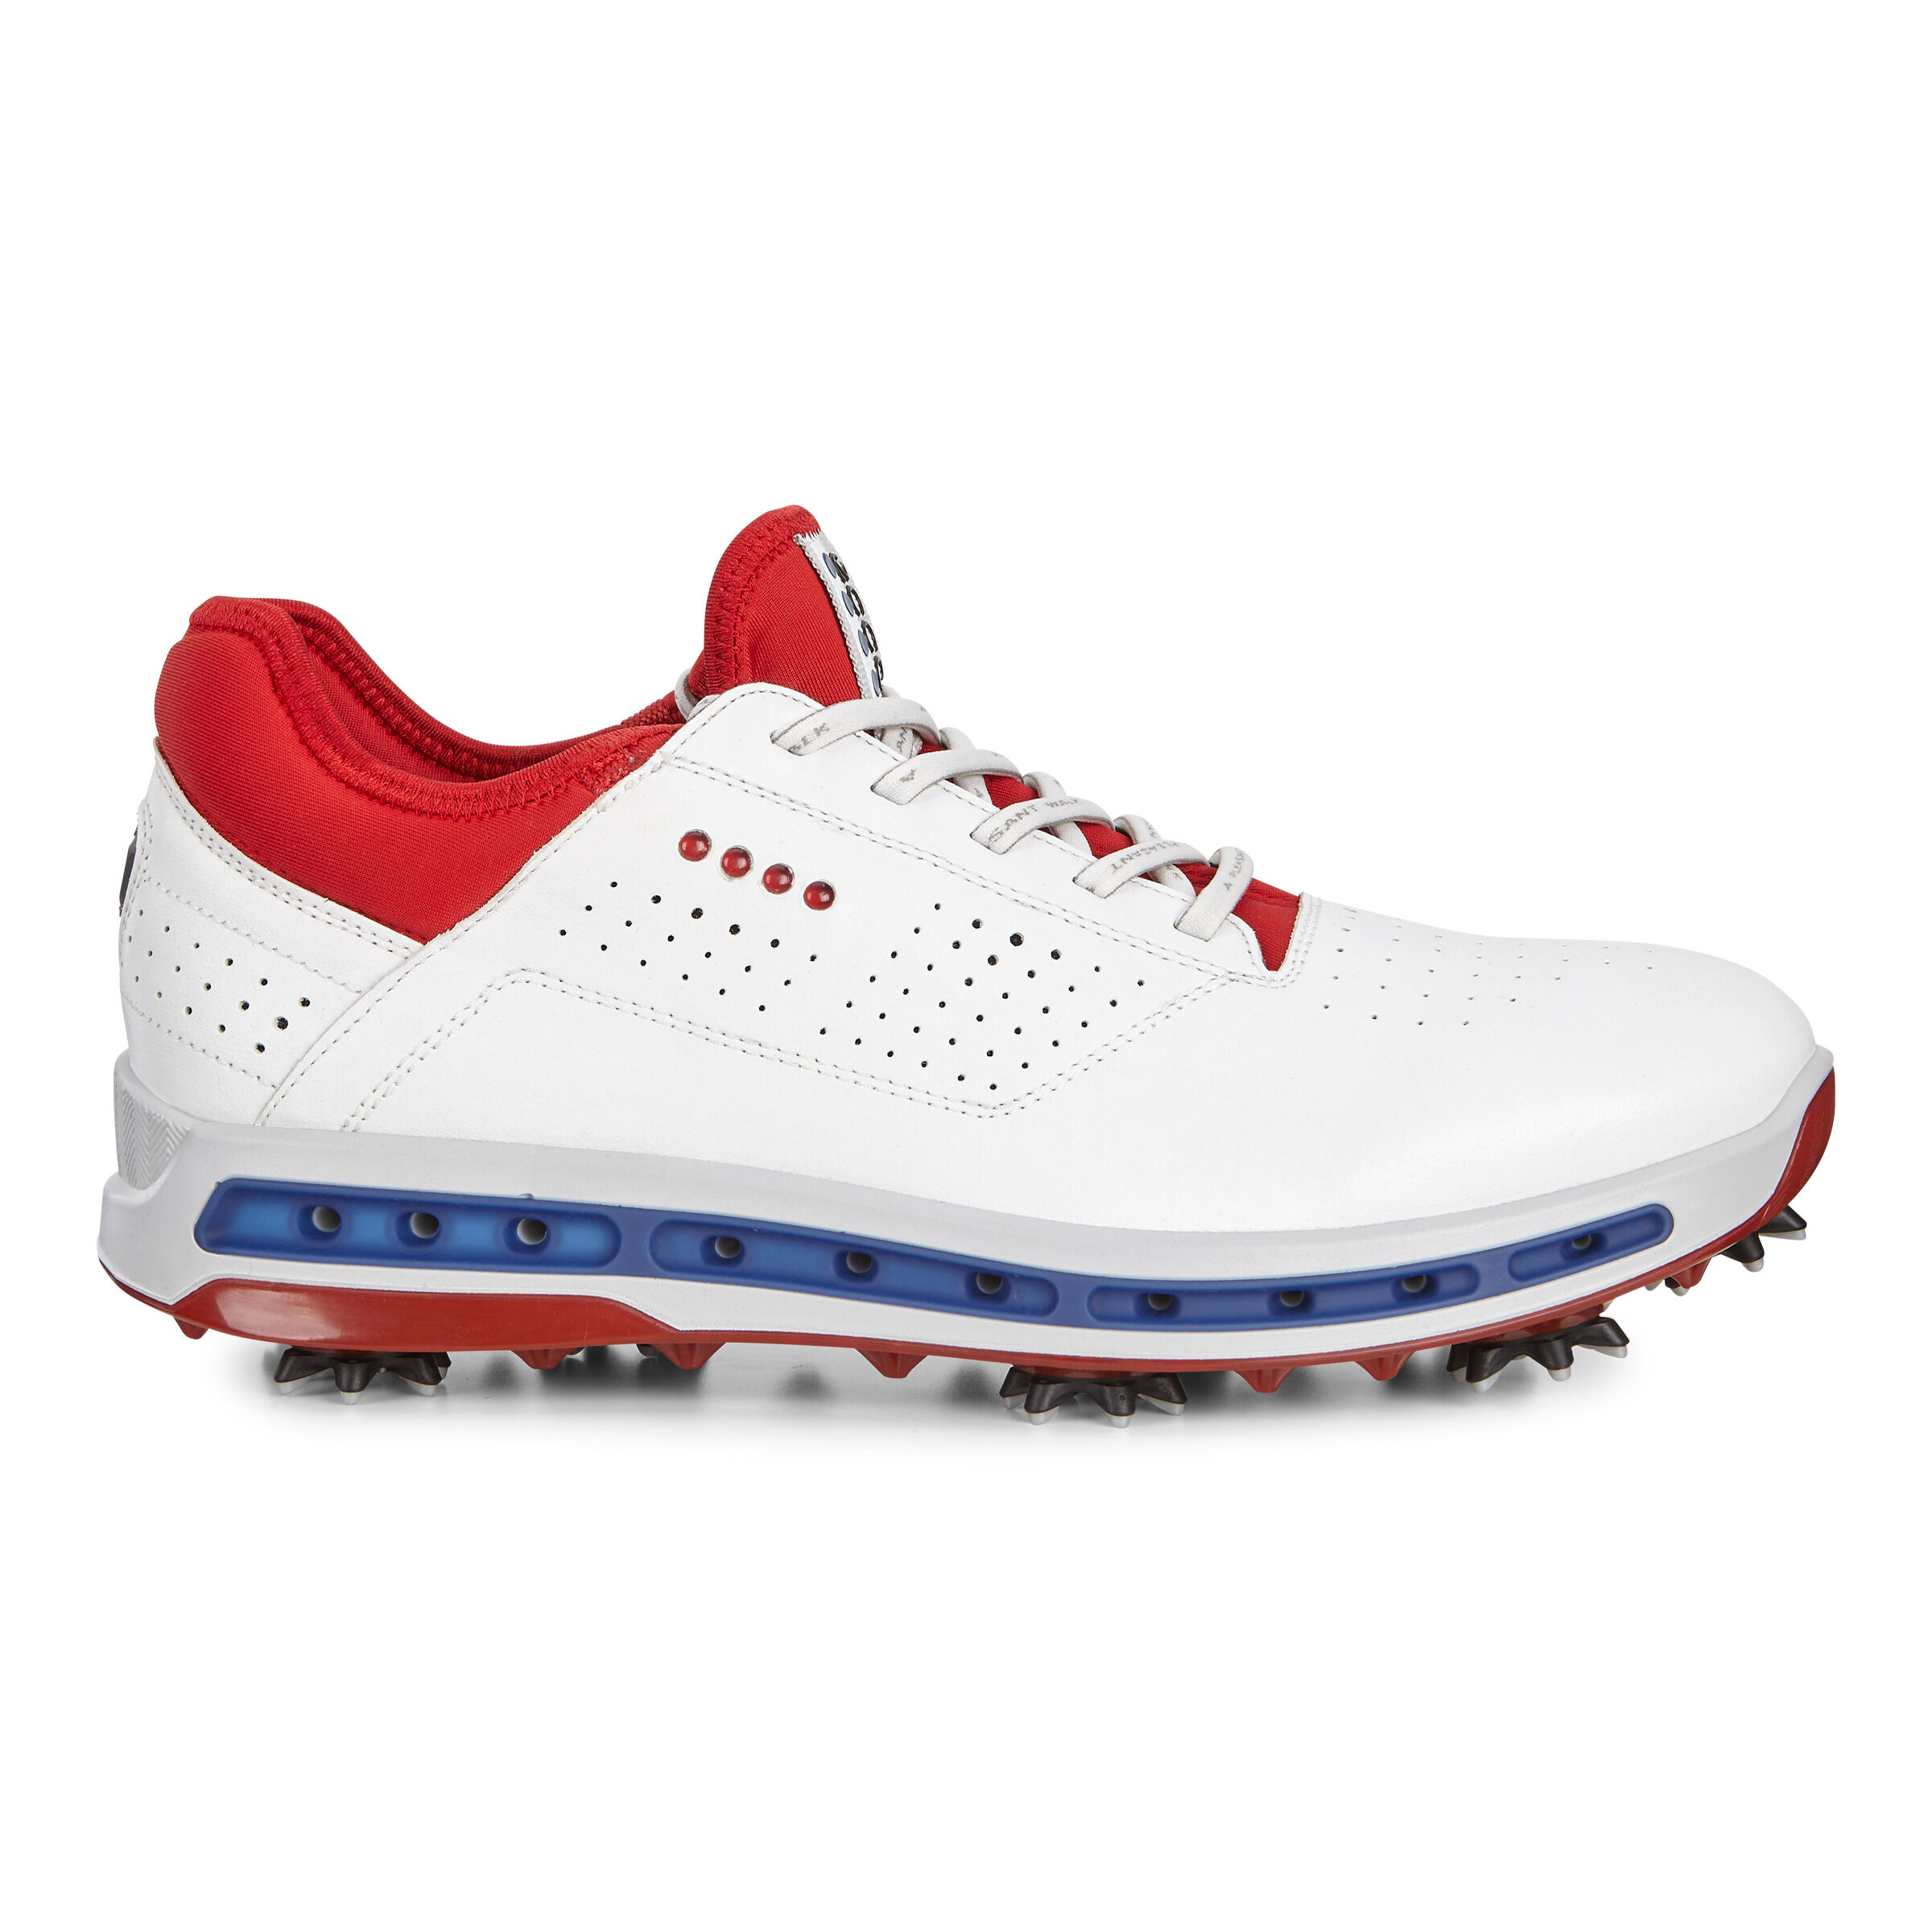 Cool GTX Mid Cut Cleated Golf Shoes 